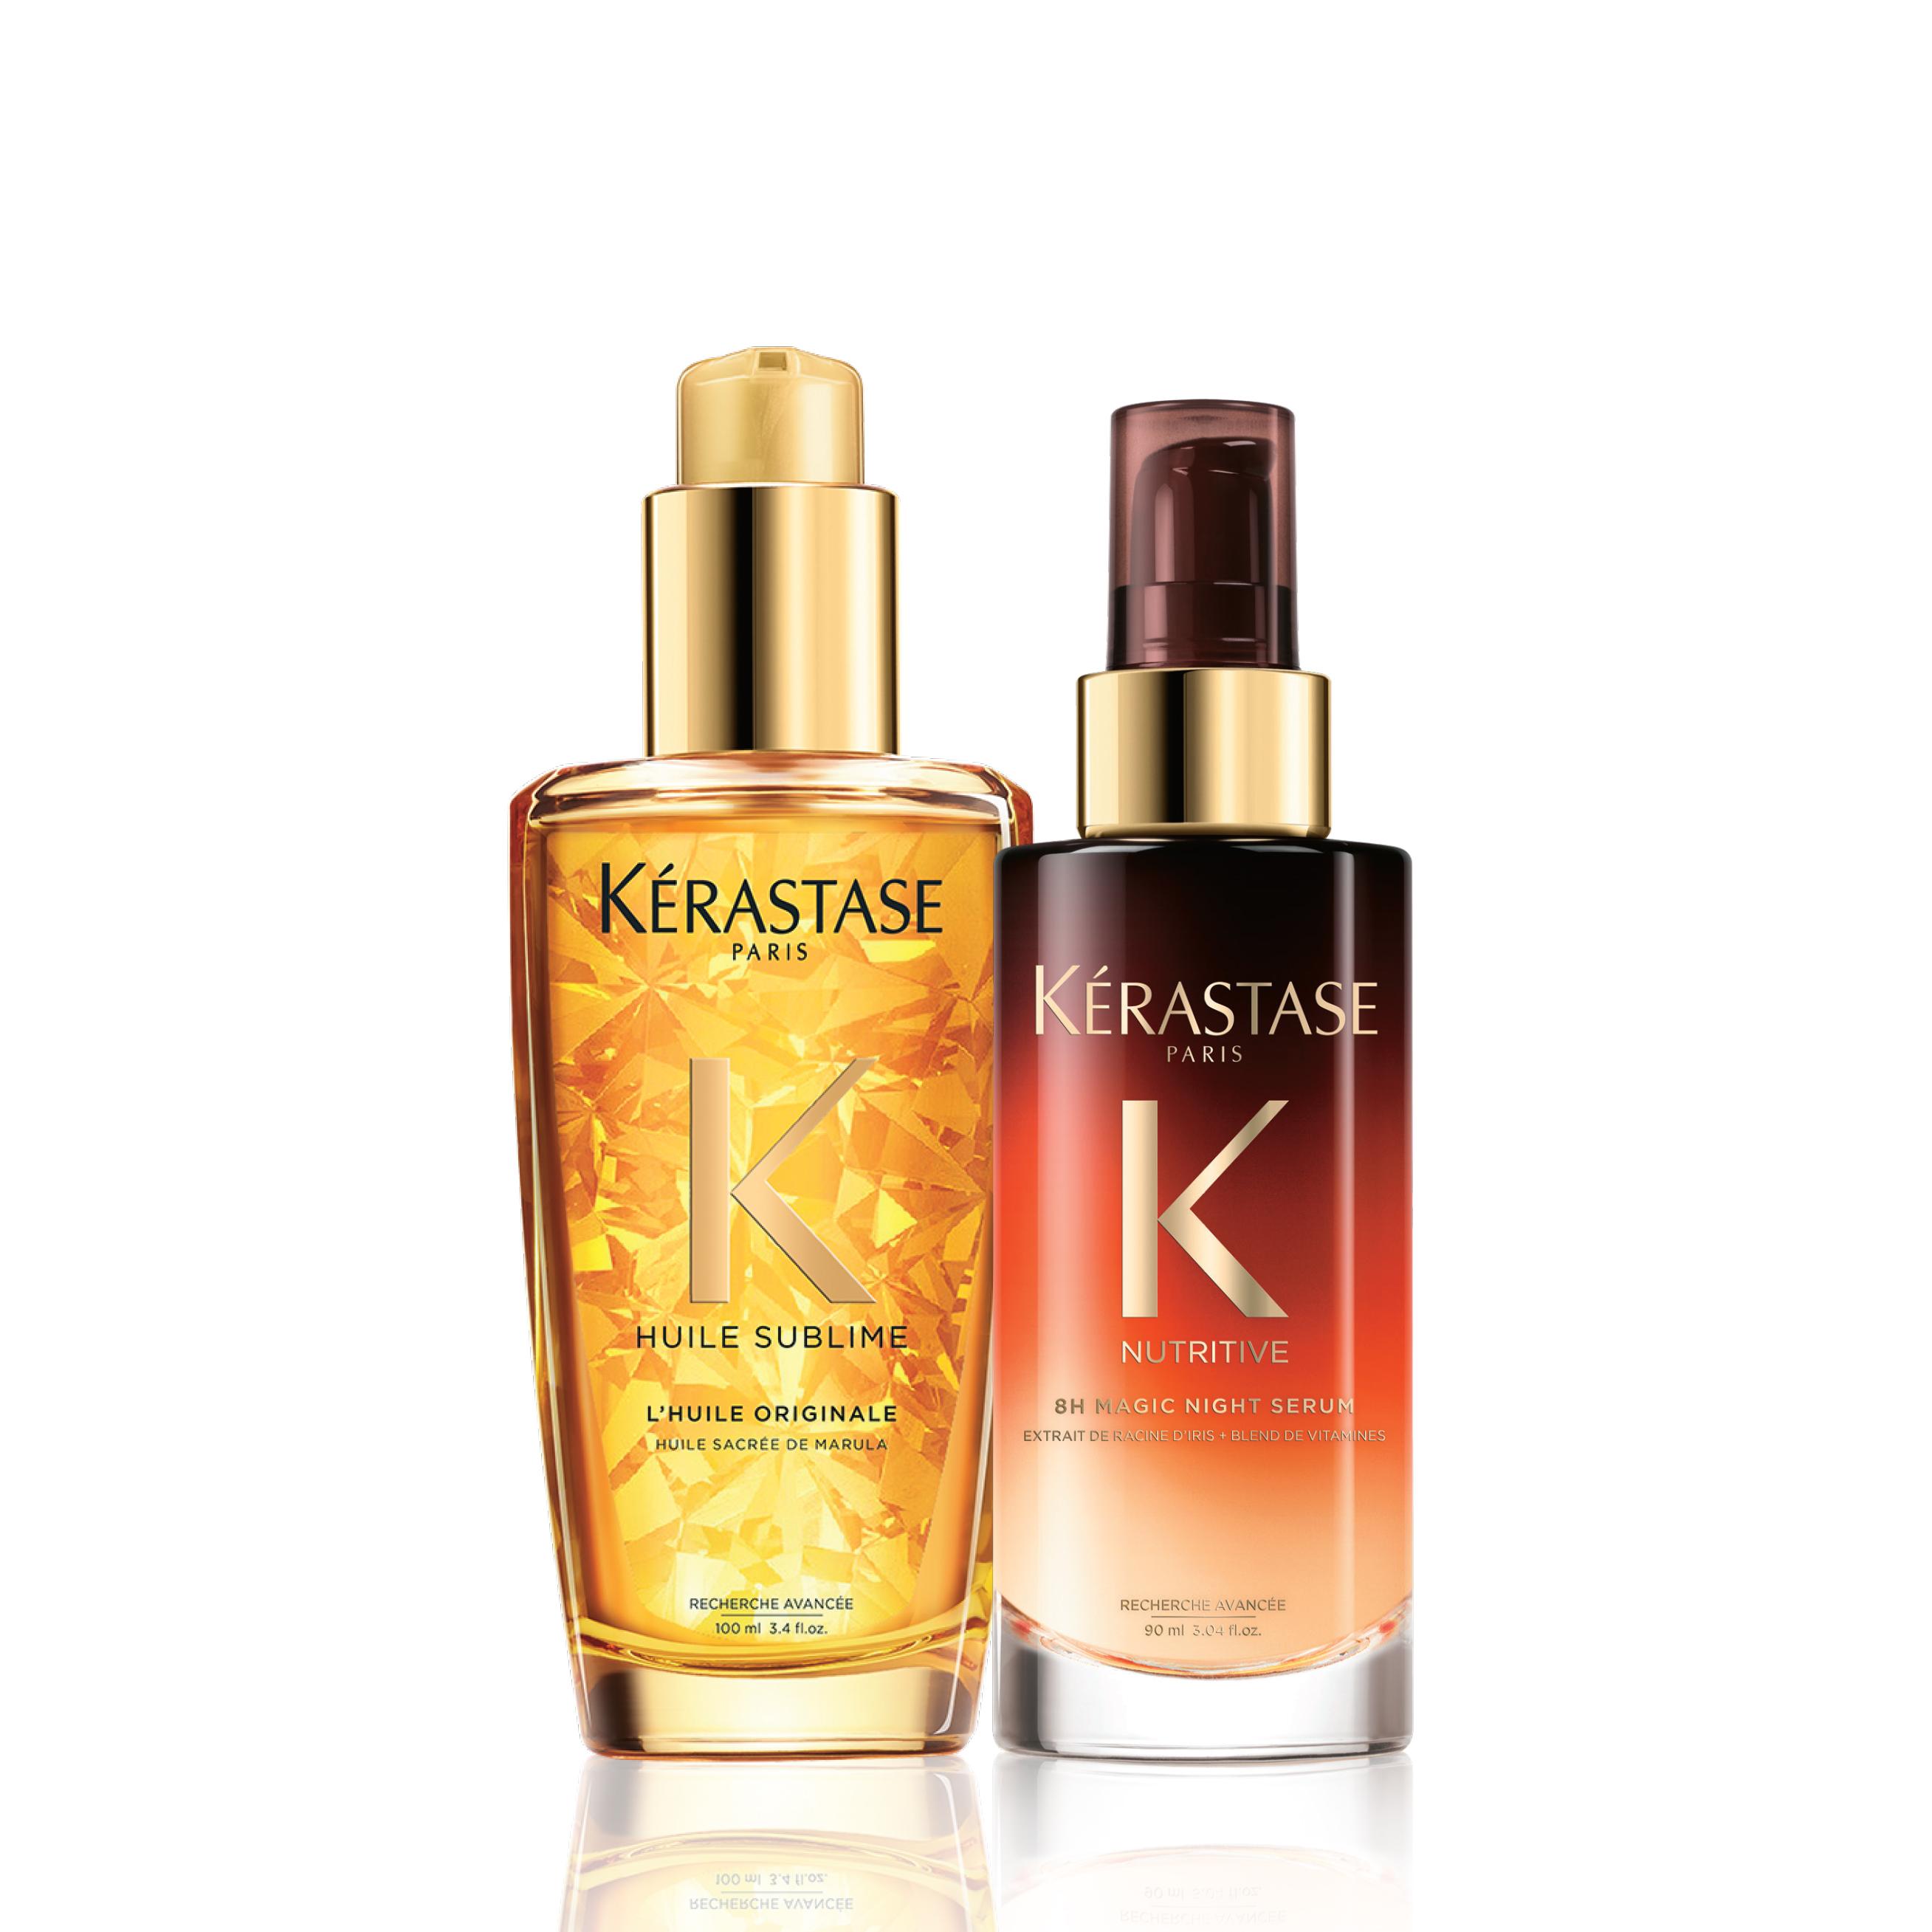 Styling  Products  This Is All the Inspiration You Need on International  Womens Day  Kérastase  Hair Kérastase